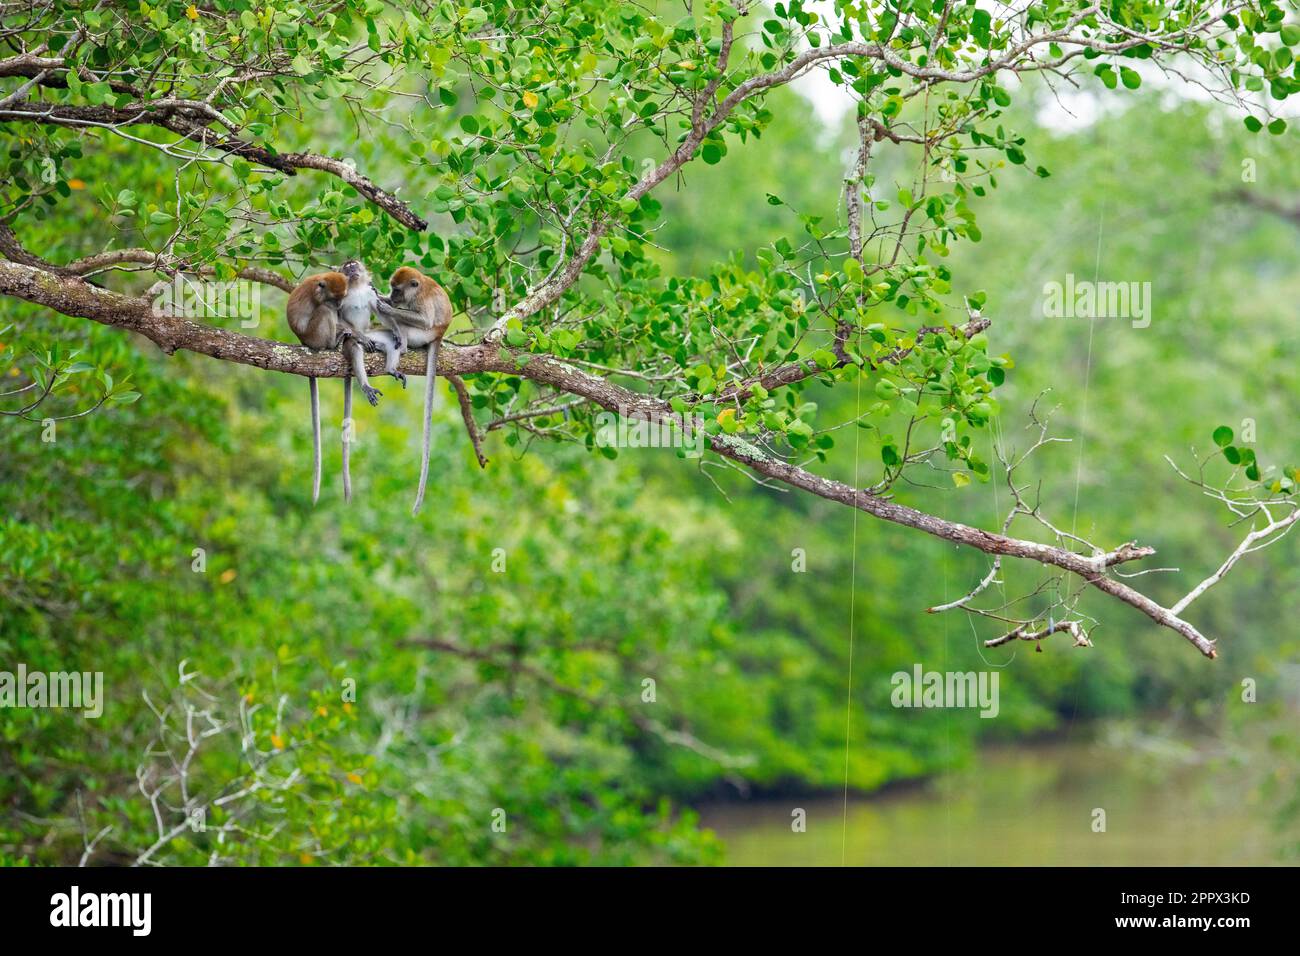 Long tailed macaque sitting on a tree above a mangrove river allogrooming, Singapore Stock Photo